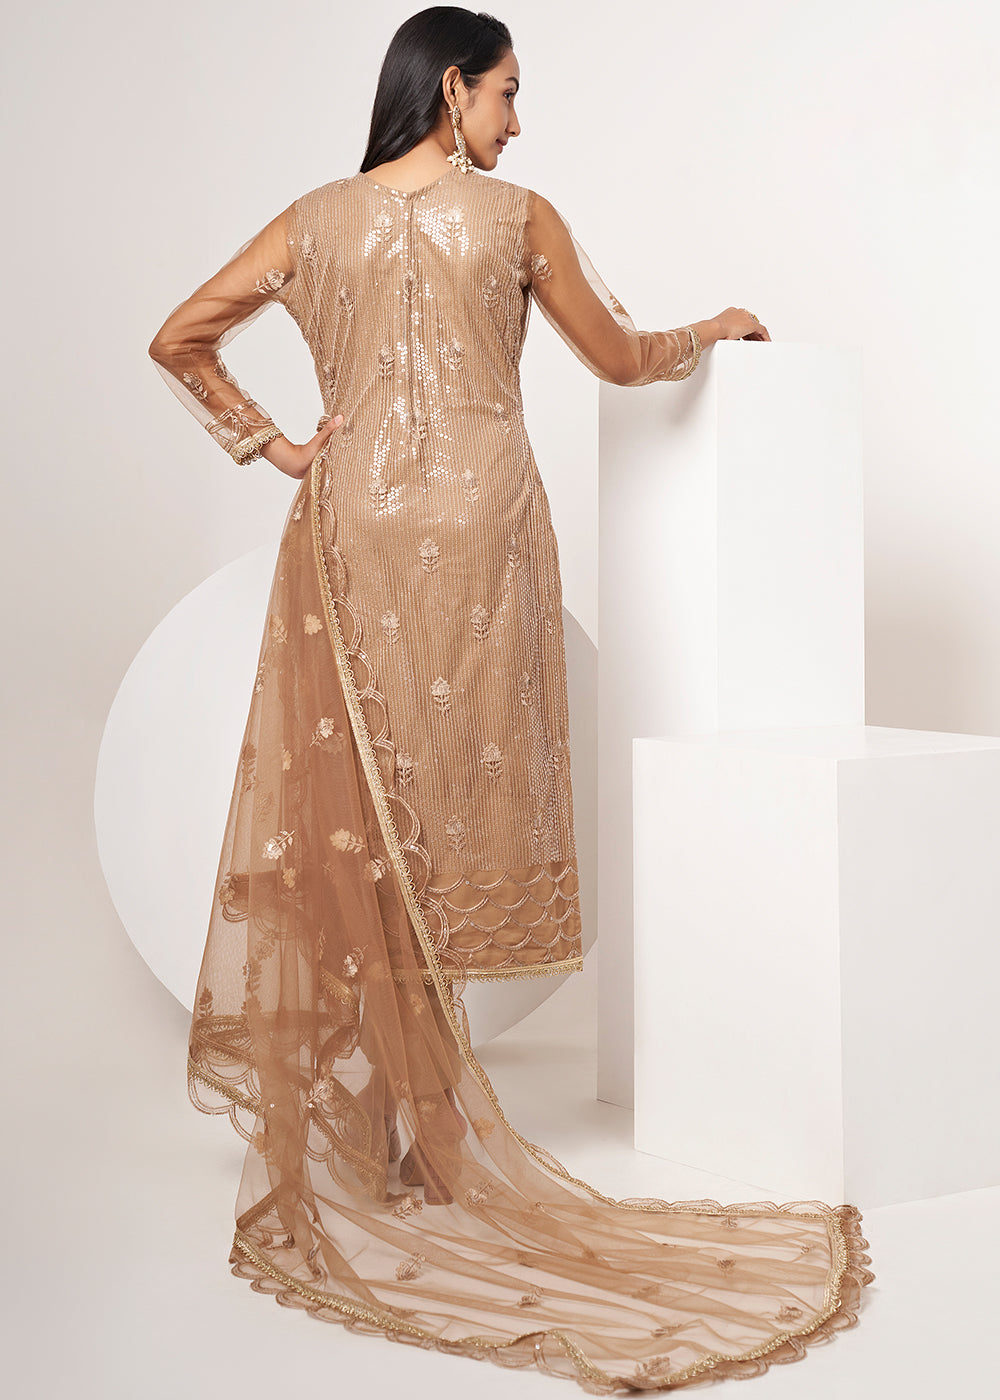 Buy Now Biscuit Brown Net Embroidered Festive Salwar Suit Online in USA, UK, Canada, Germany, Australia & Worldwide at Empress Clothing. 